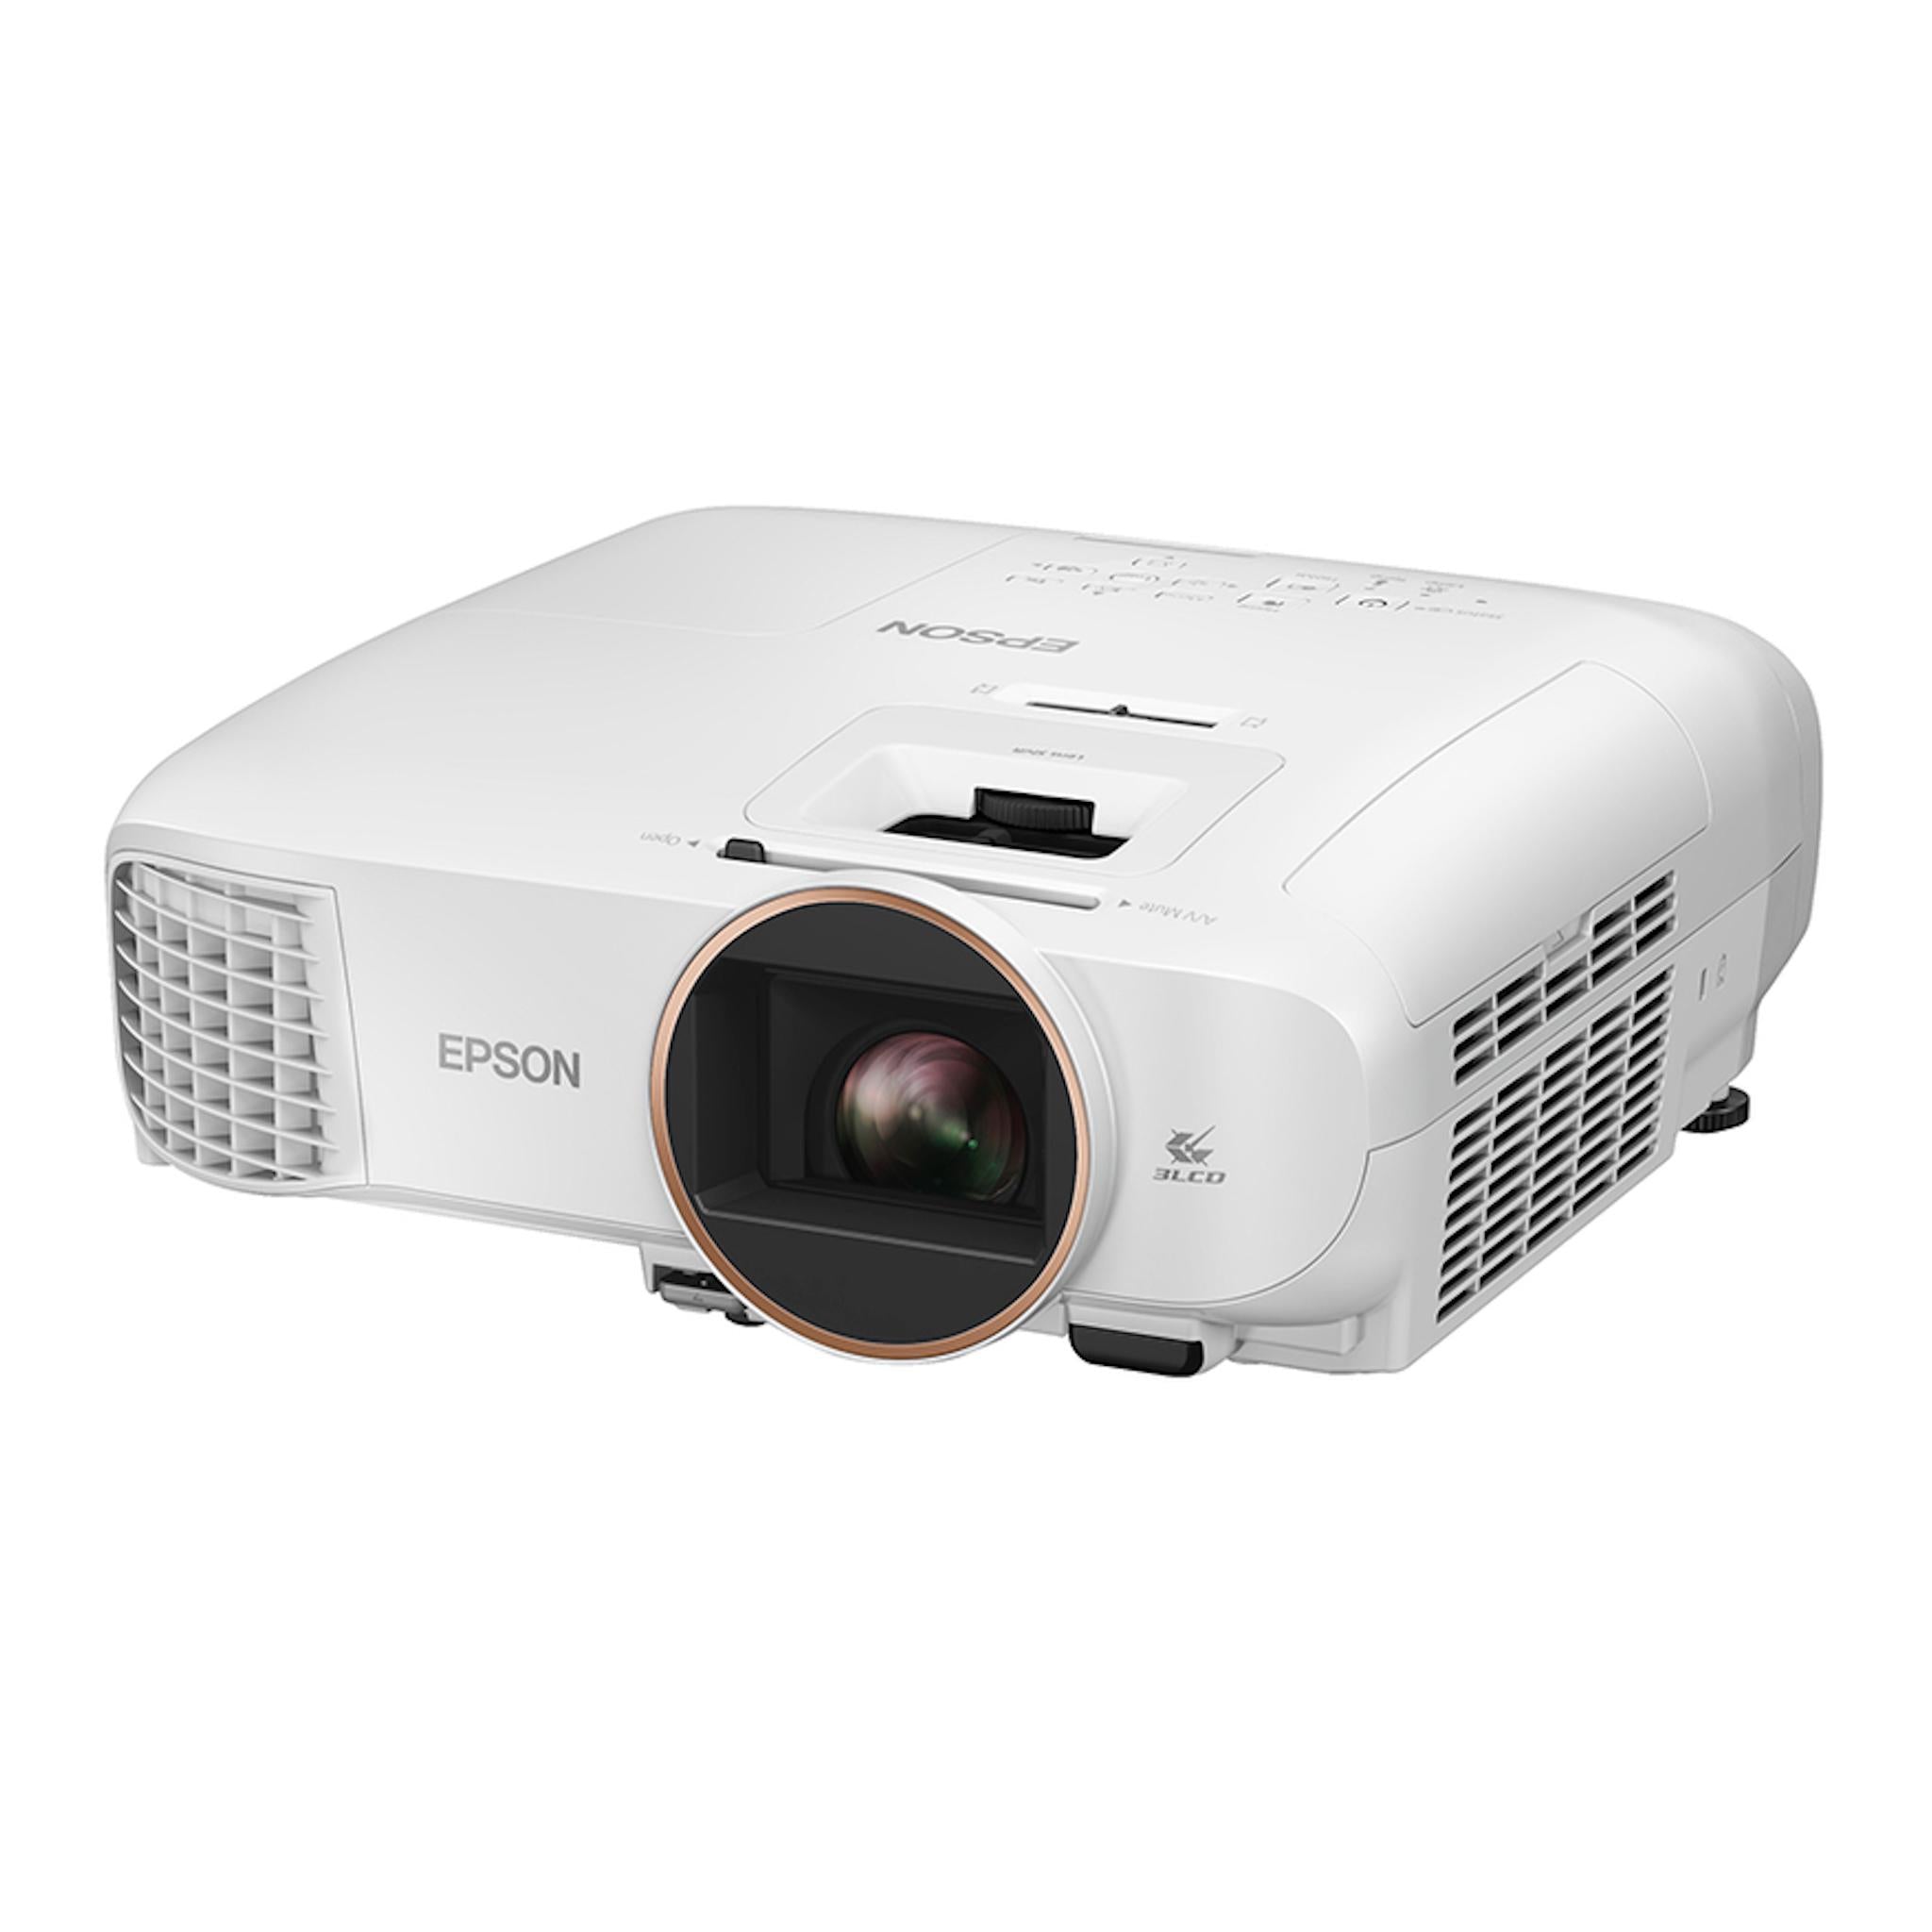 Epson EH-TW 5820 - 3LCD 1080p Streaming Projector - AVStore